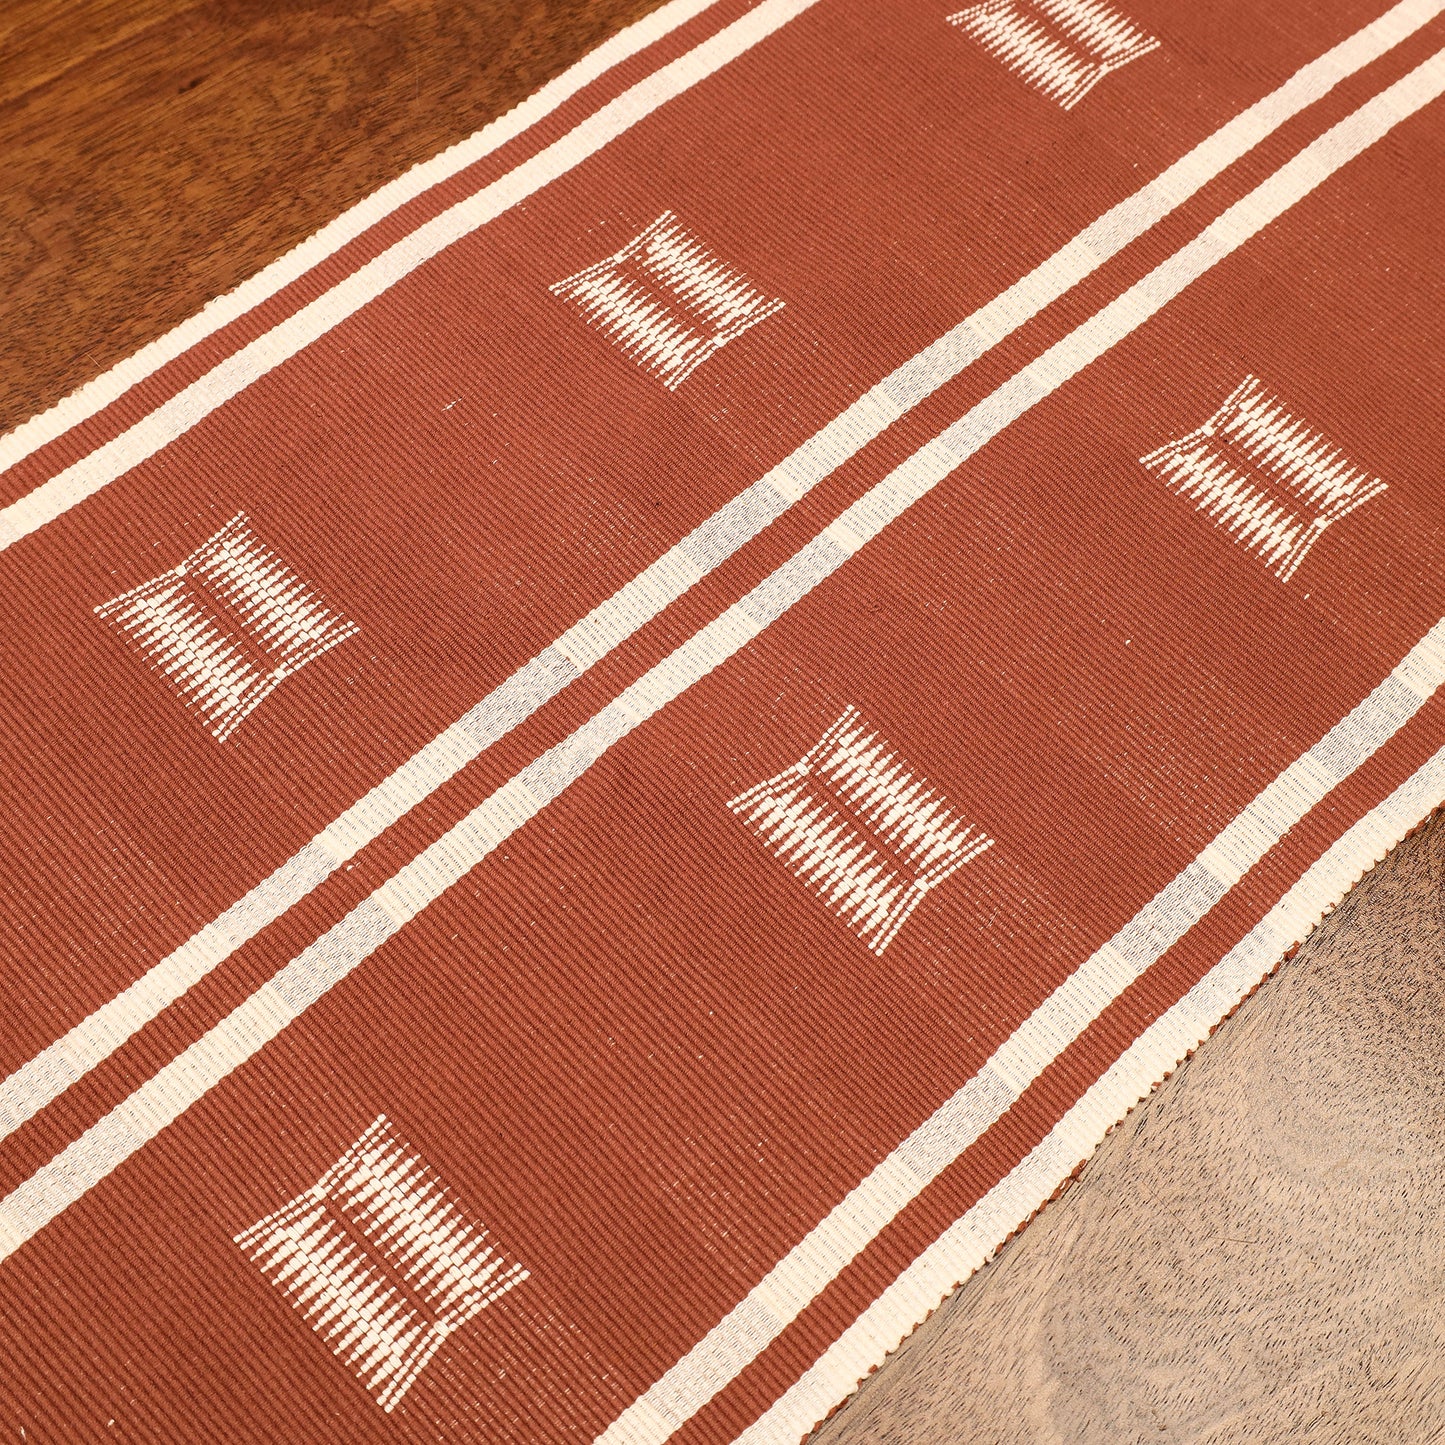 Nagaland Tribal Handwoven Pure Cotton Table Runner (70 x 14 in)